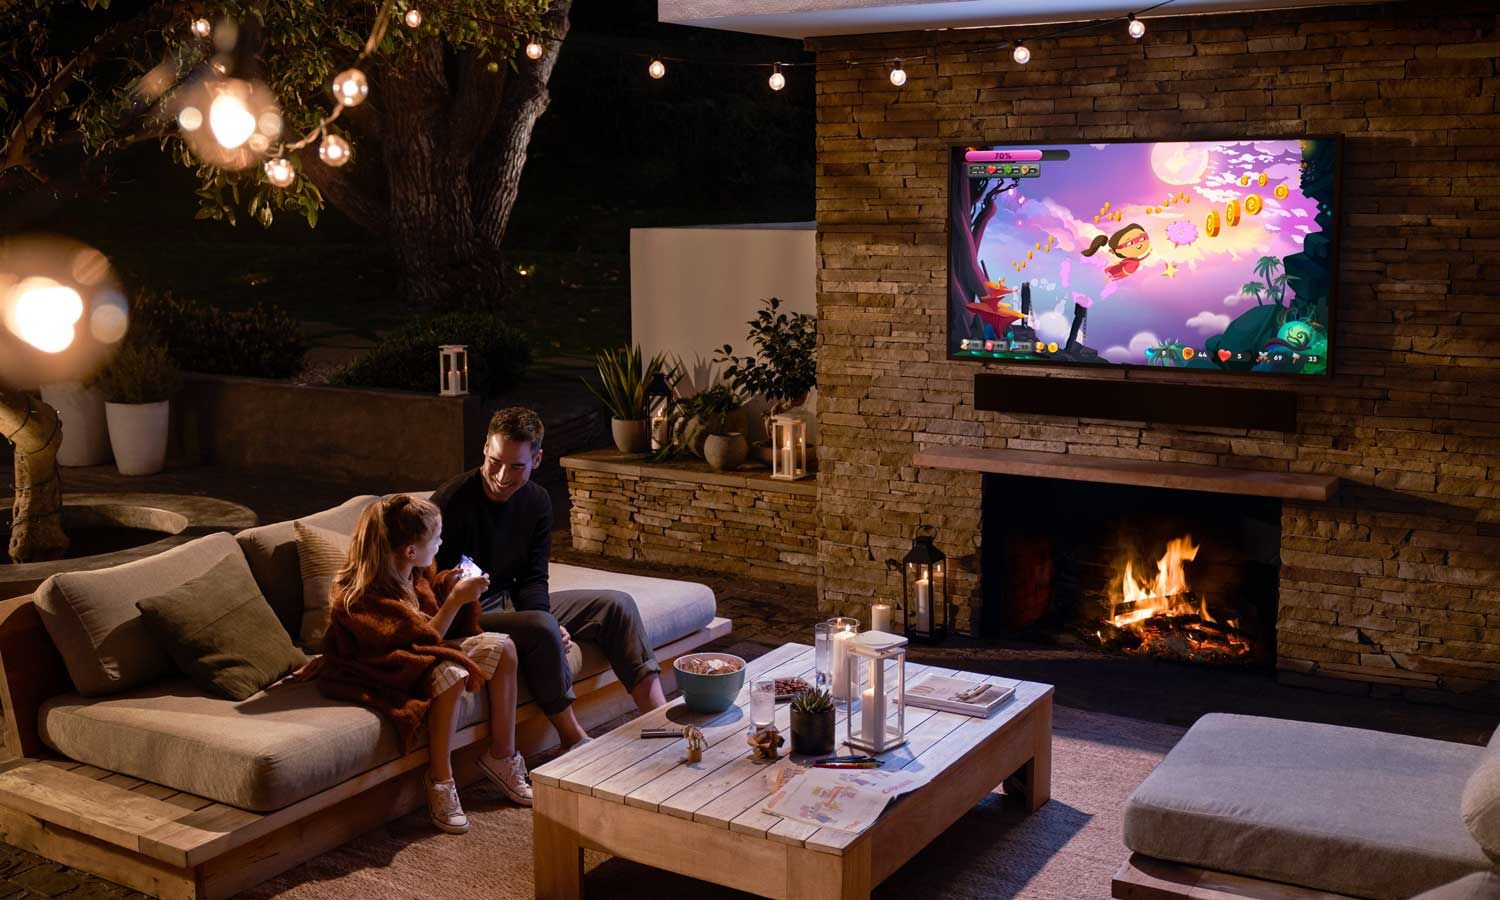 Sony outdoor TV in a patio at night